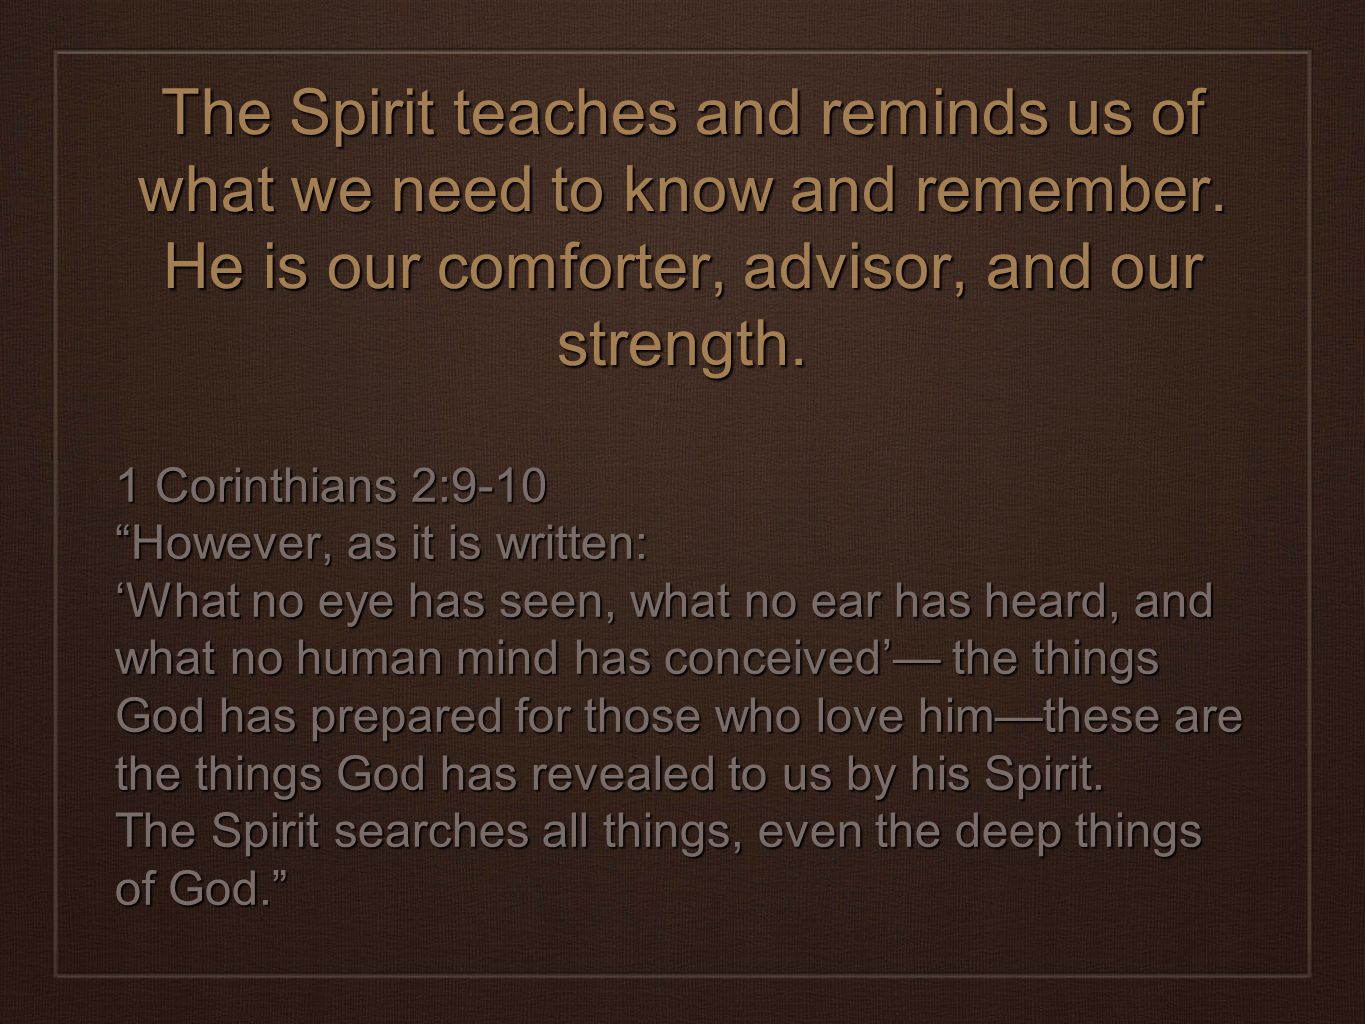 The Spirit teaches and reminds us of what we need to know and remember.